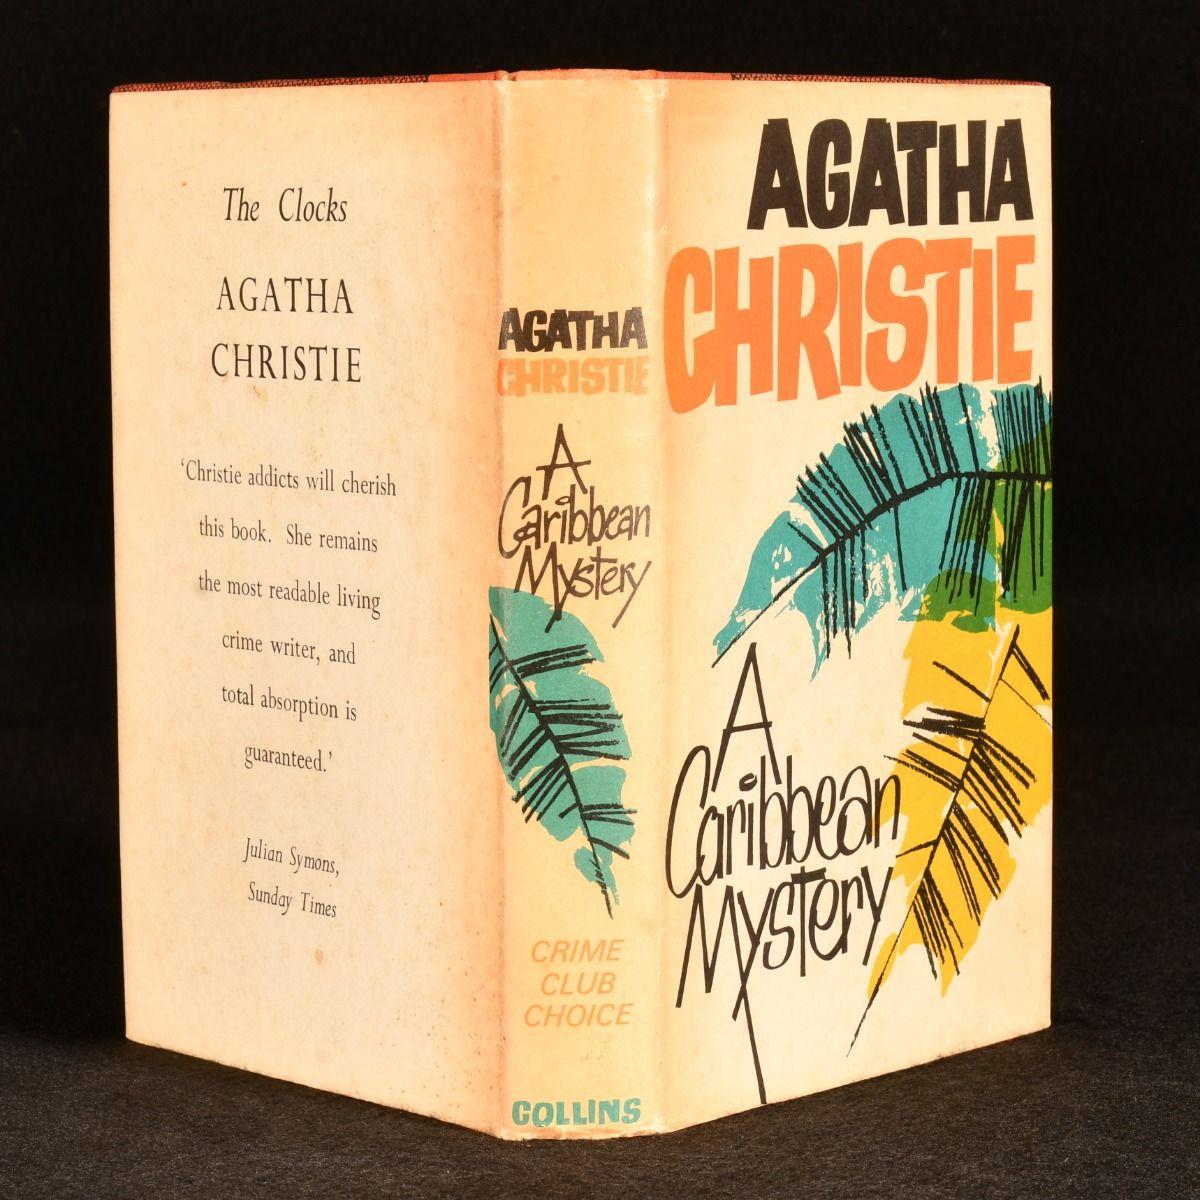 An exceptional signed first edition of this classic Miss Marple novel, signed from Christie to her secretary, Carlo Fisher.

With a dedication from Christie to the front free endpaper reading:

'Carlo, with love from Agatha'

From the library of